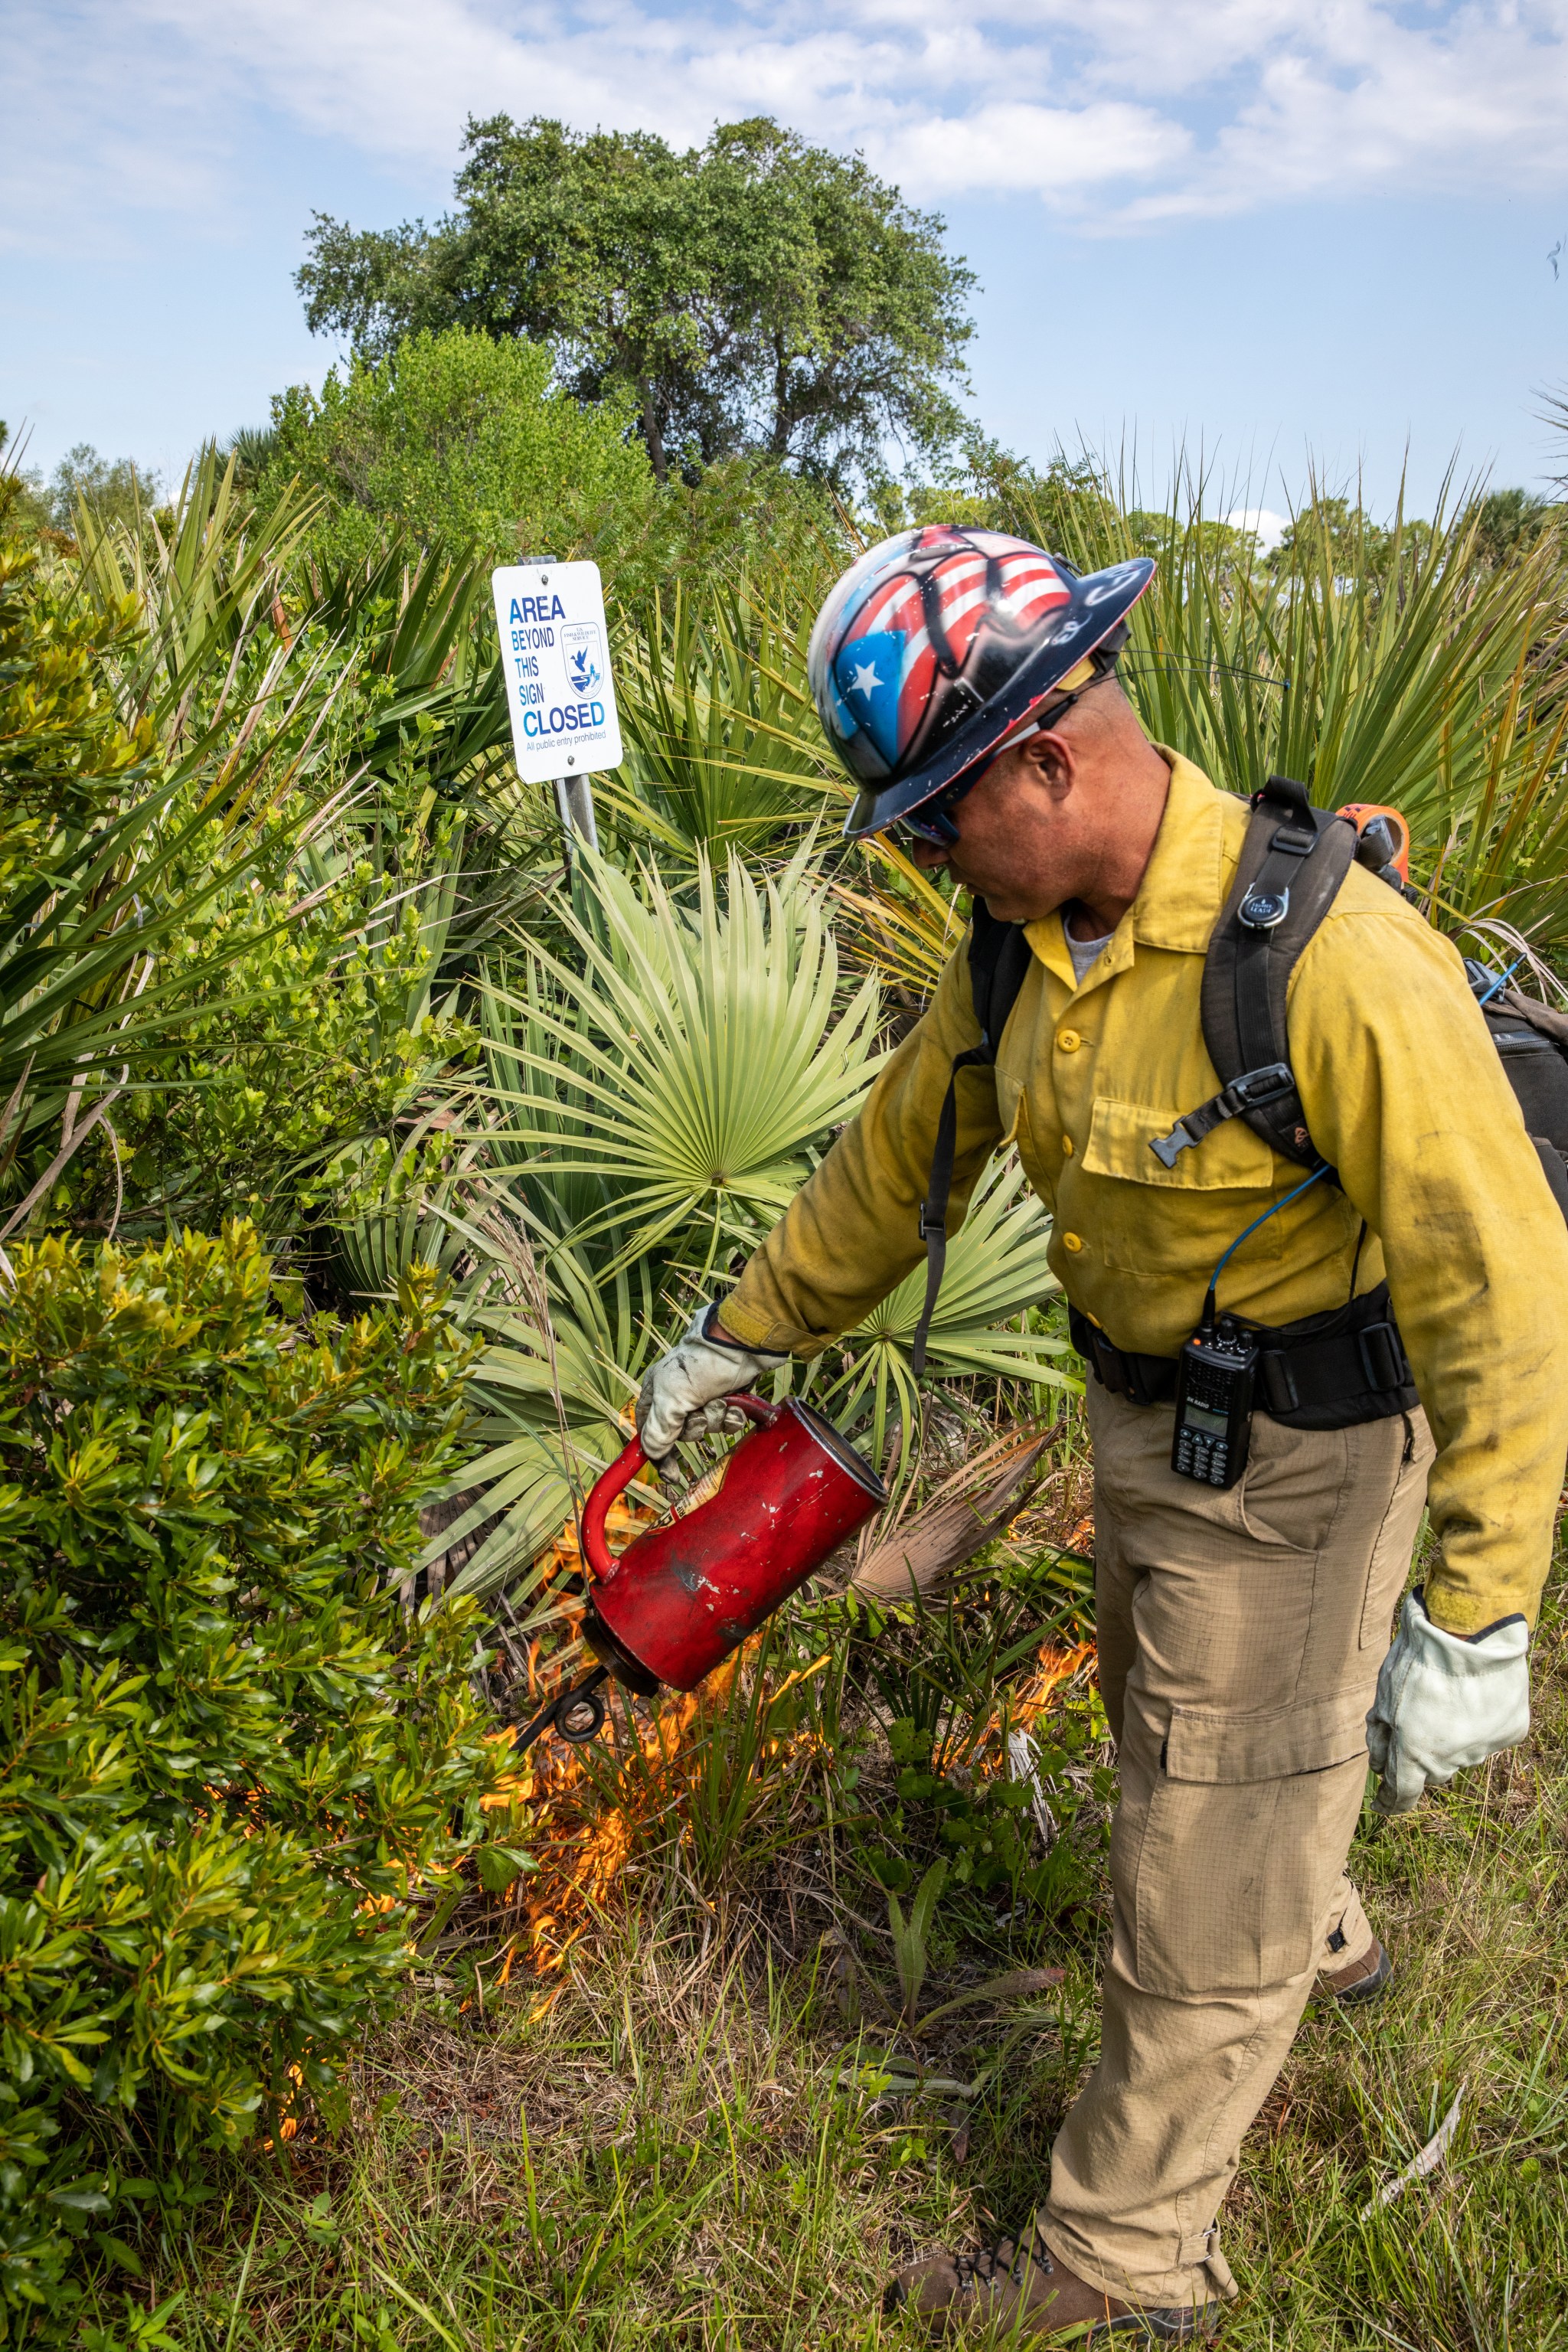 Fire official setting prescribed burn.